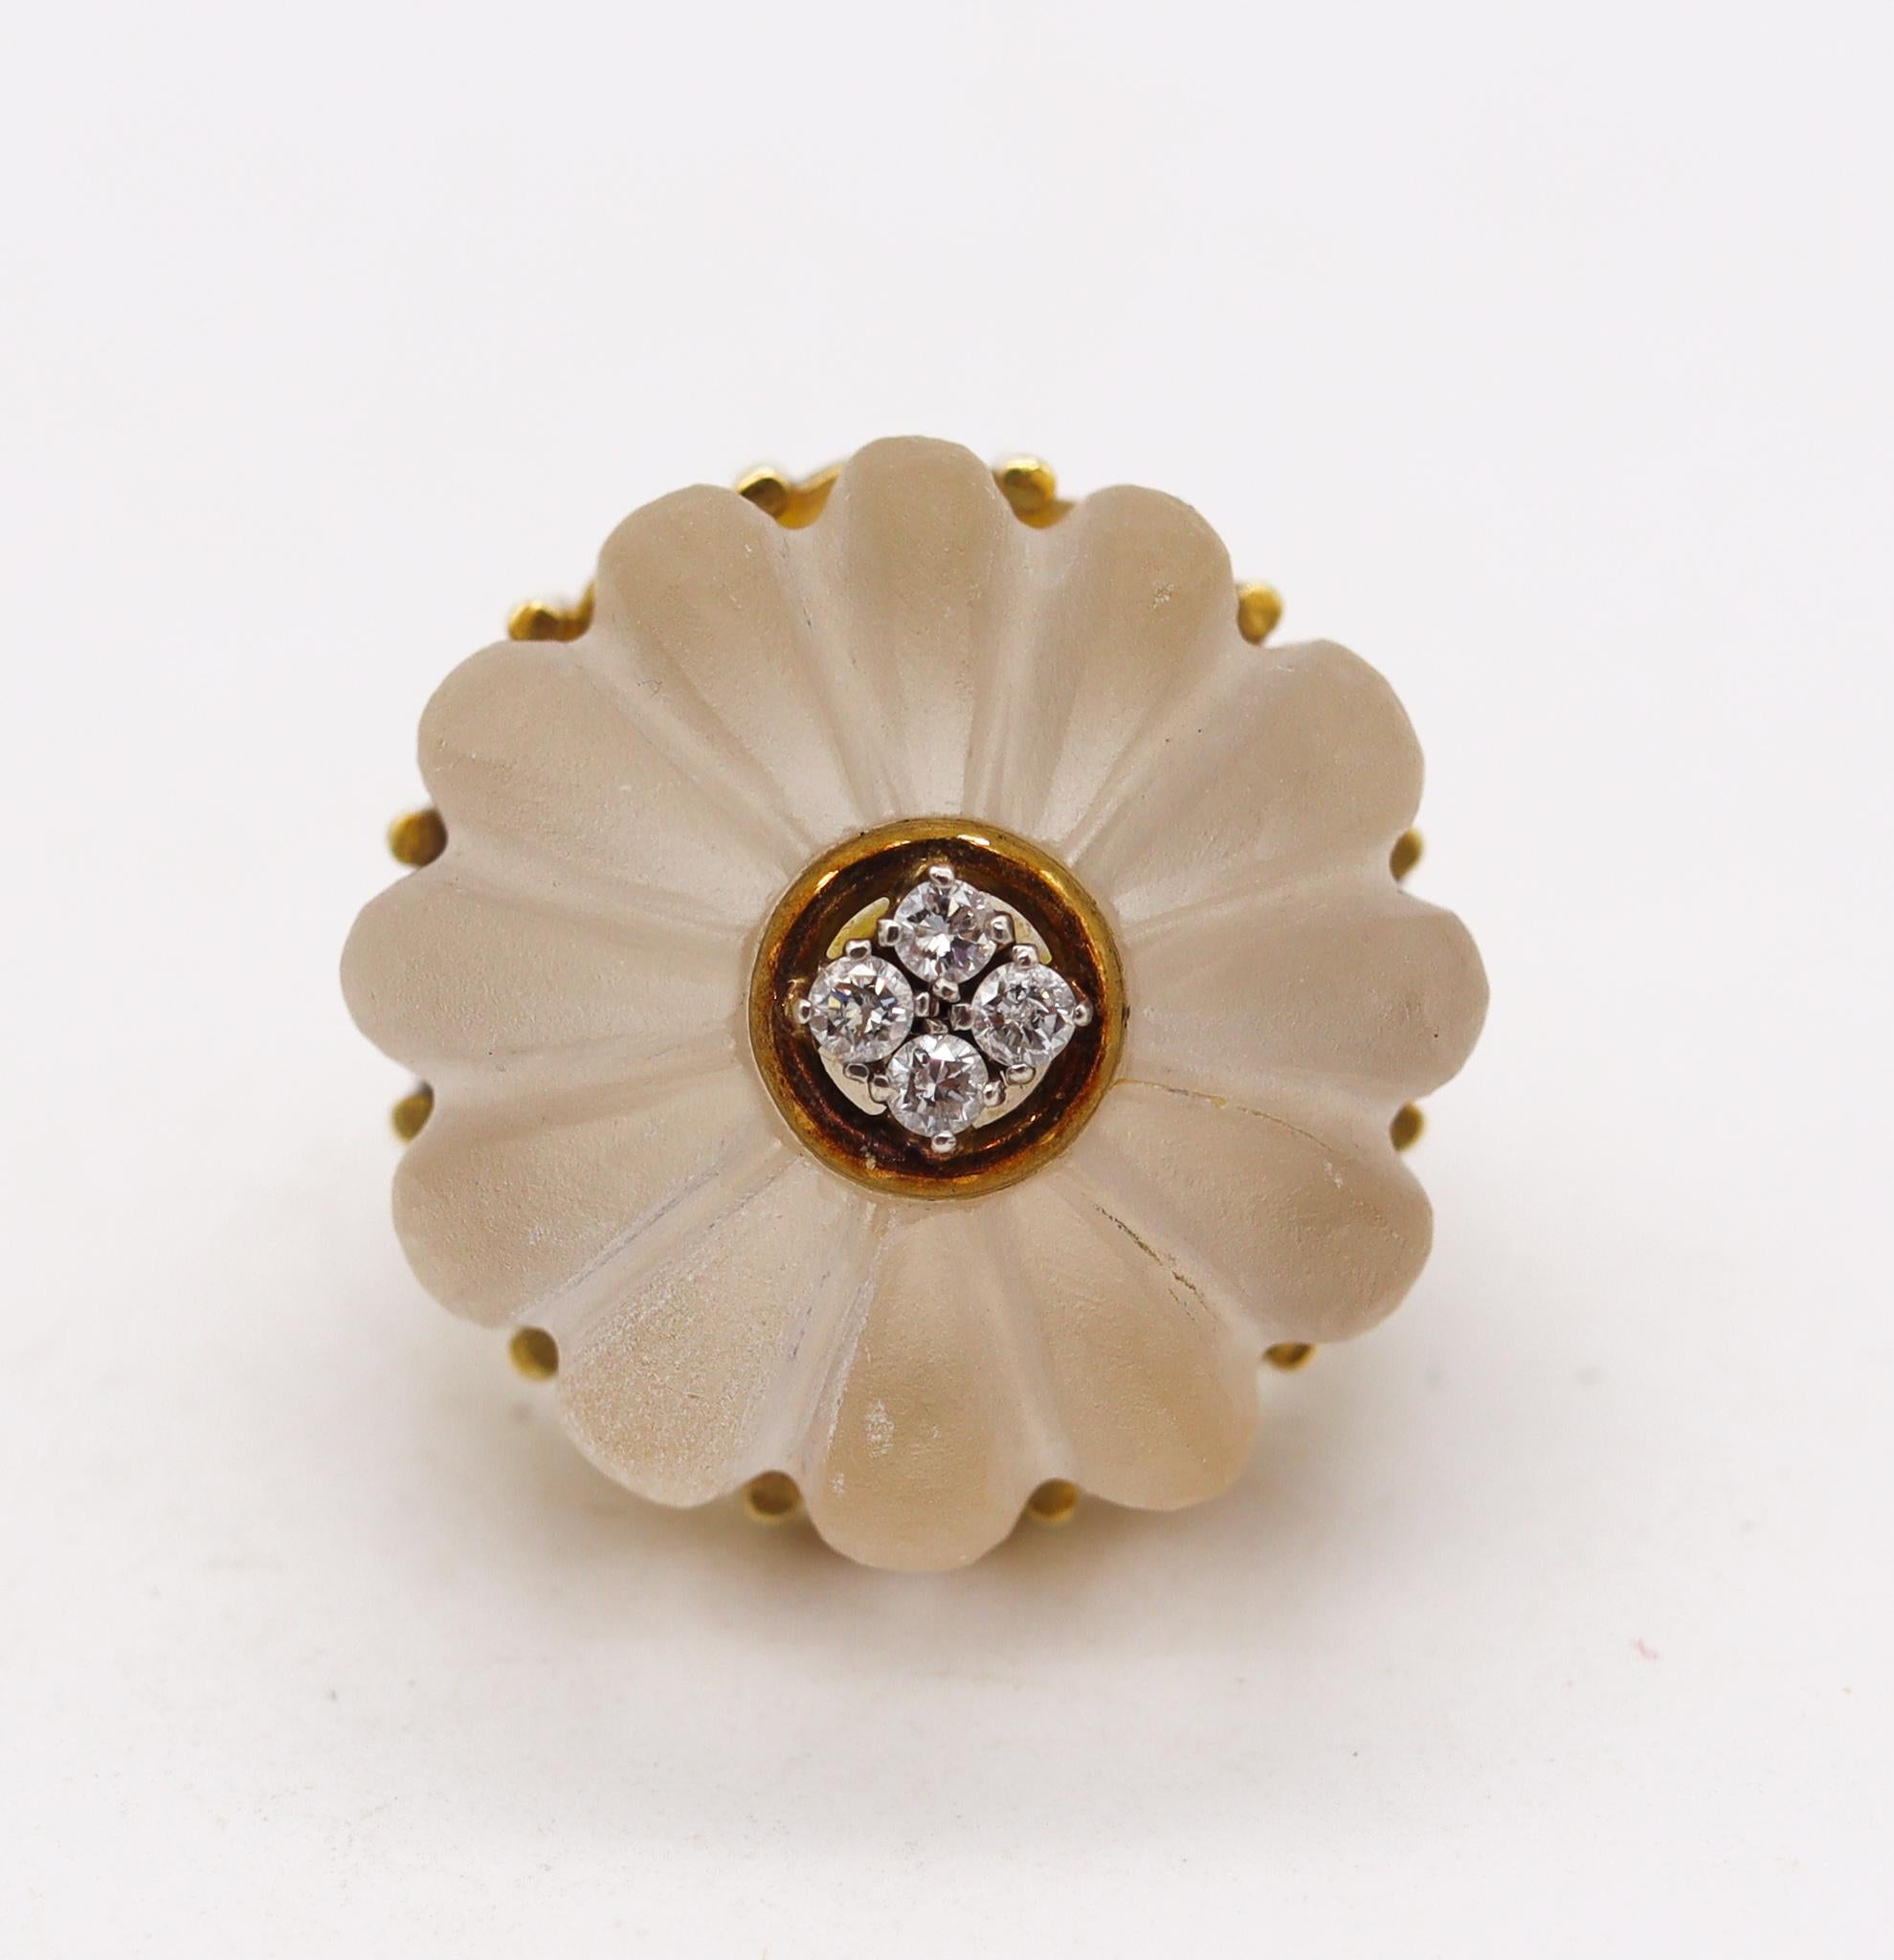 Cocktail ring from the modernism period.

An estatement modernist bold ring, created during the modernist period, circa 1970's. This piece was crafted in solid yellow gold of 18 karats, with the surfaces finished with Fiorentine patterns.

Mount on